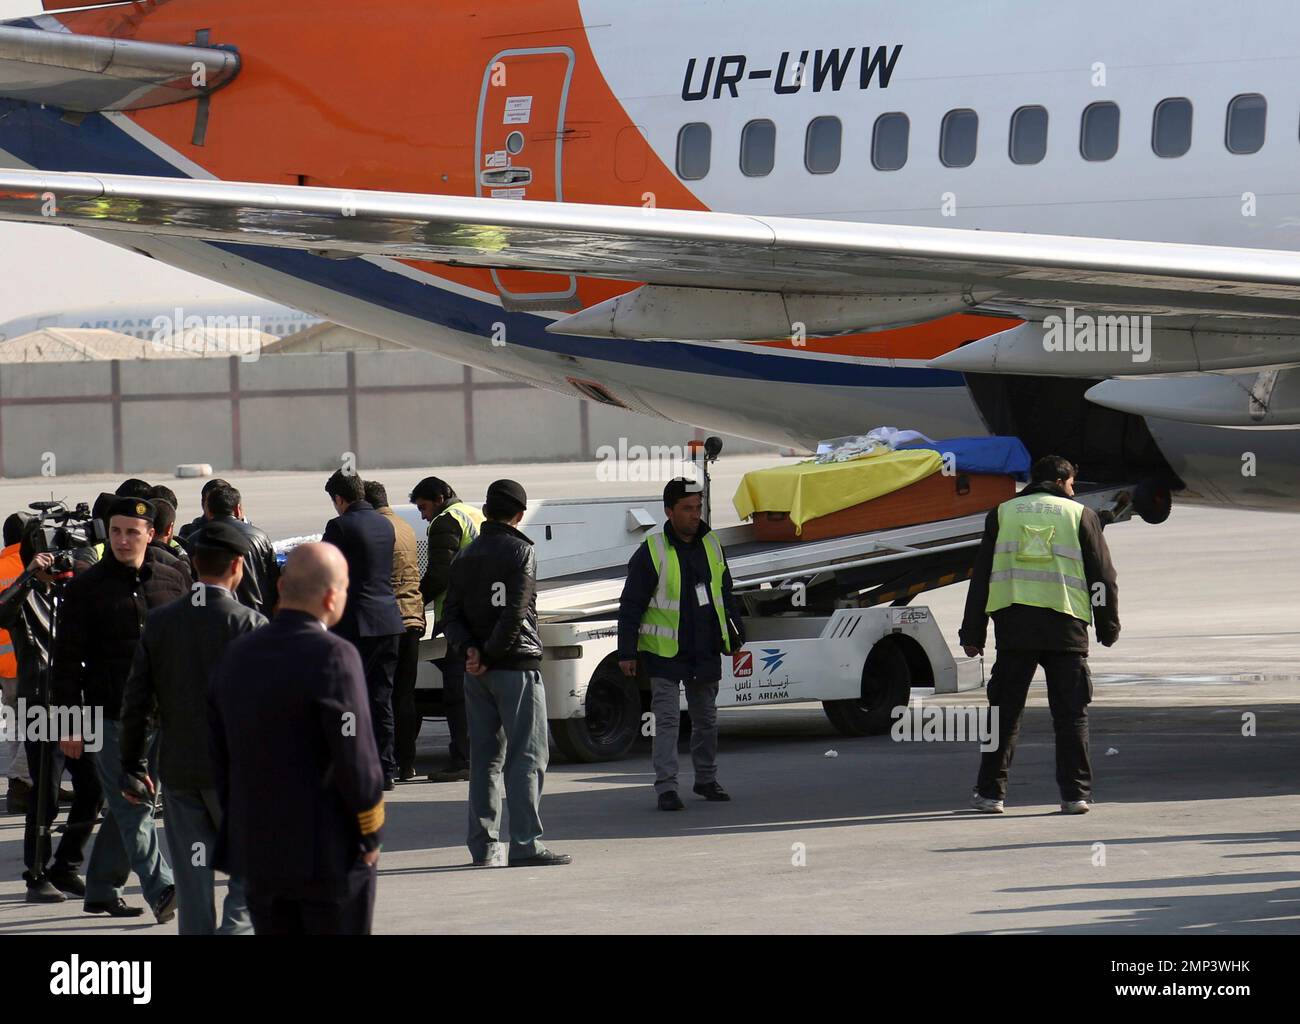 The coffin of a Ukrainian employee of the Kam Air Afghan airline is loaded  into a plane at the international airport in Kabul, Afghanistan, Wednesday,  Jan. 24, 2108. The siege at Kabul's